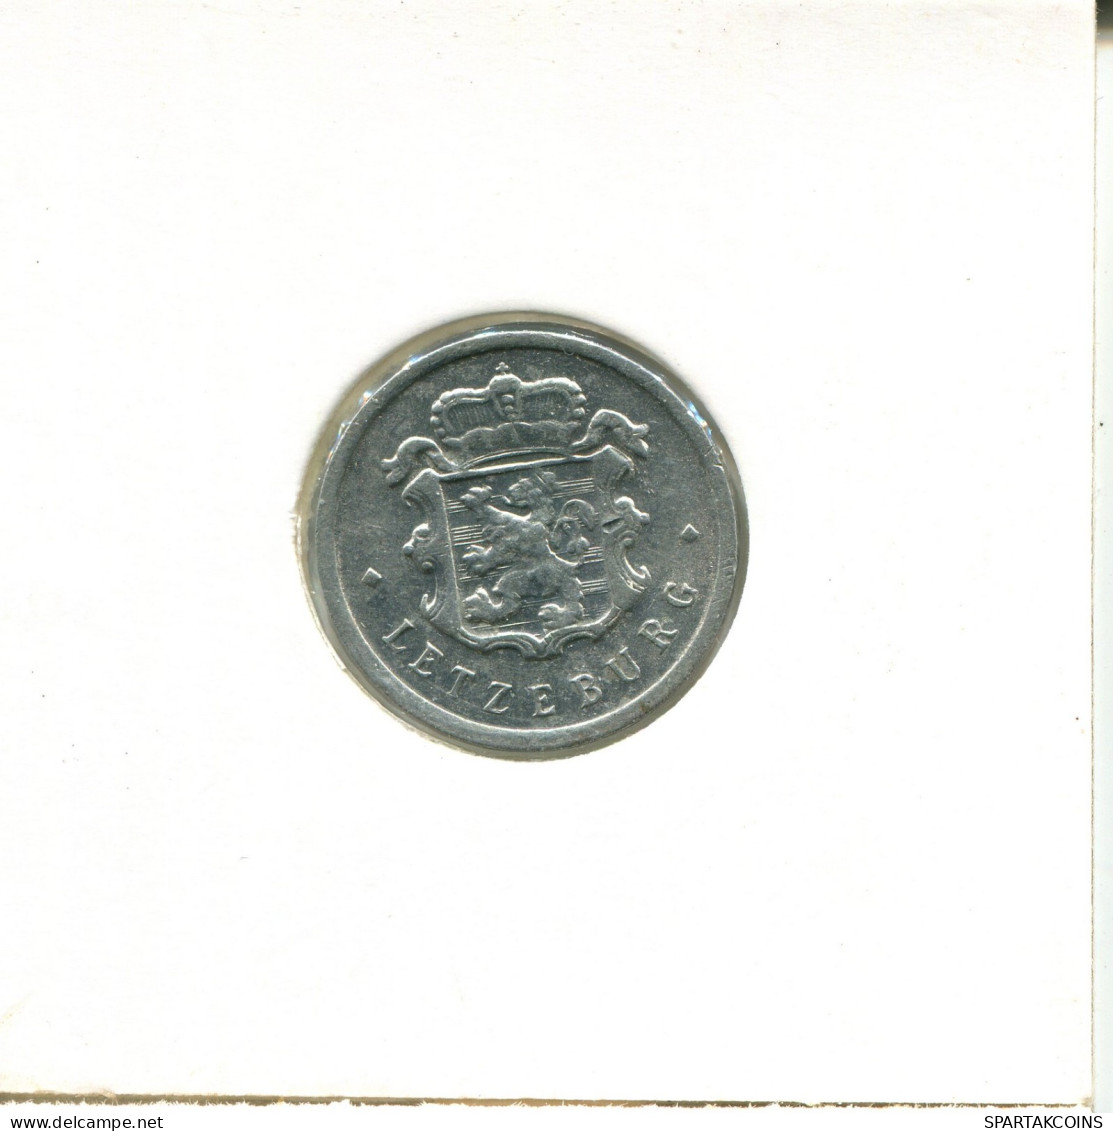 25 CENTIMES 1968 LUXEMBURG LUXEMBOURG Münze #AW651.D.A - Luxemburgo